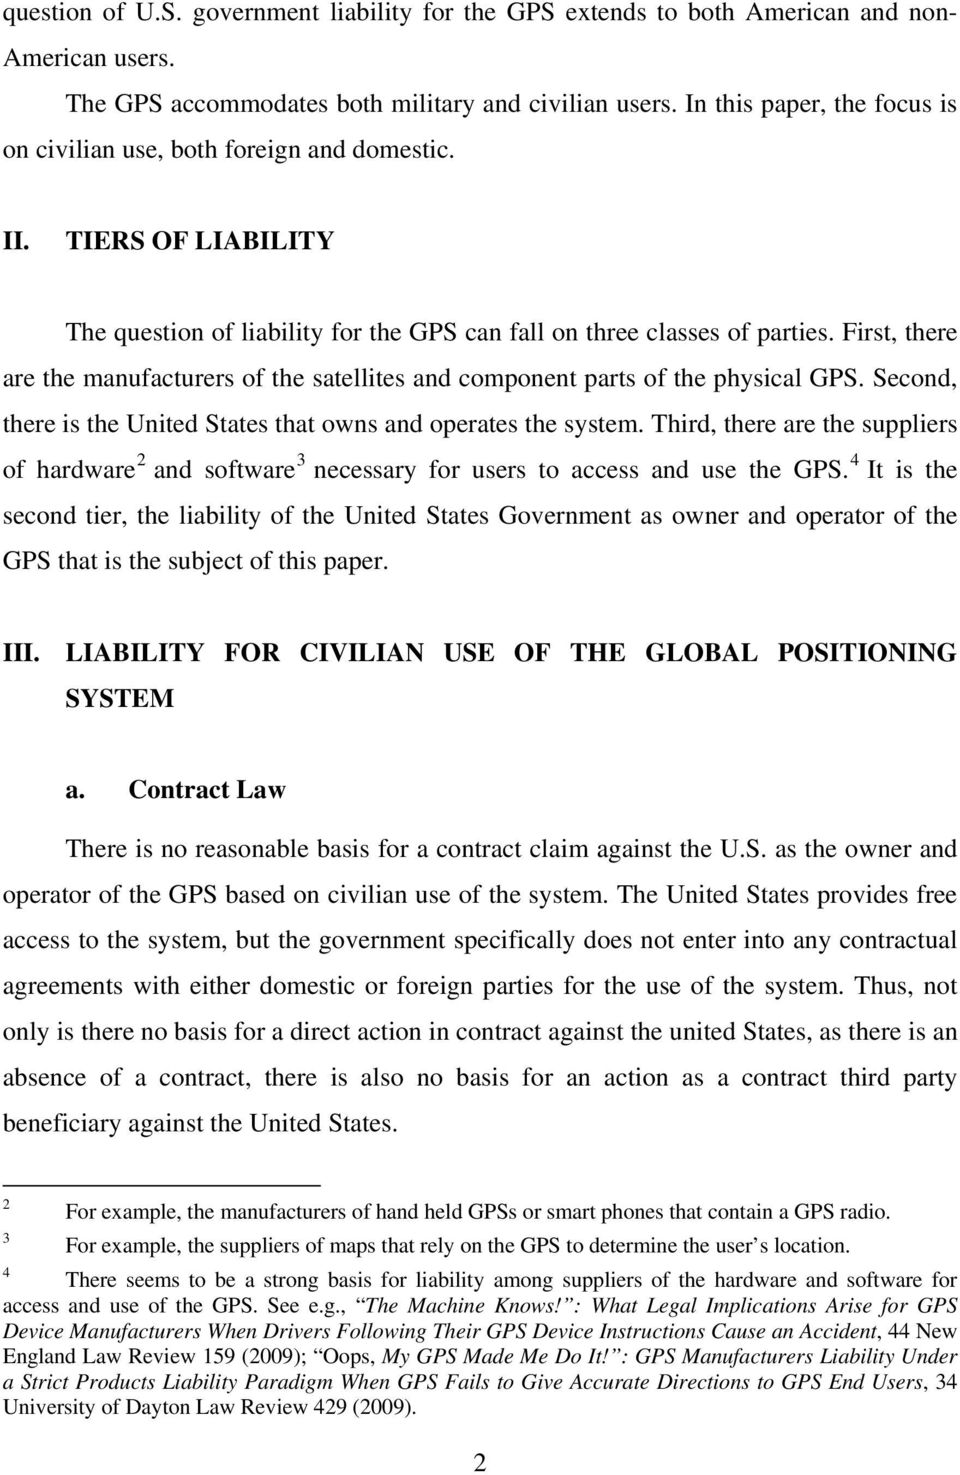 First, there are the manufacturers of the satellites and component parts of the physical GPS. Second, there is the United States that owns and operates the system.